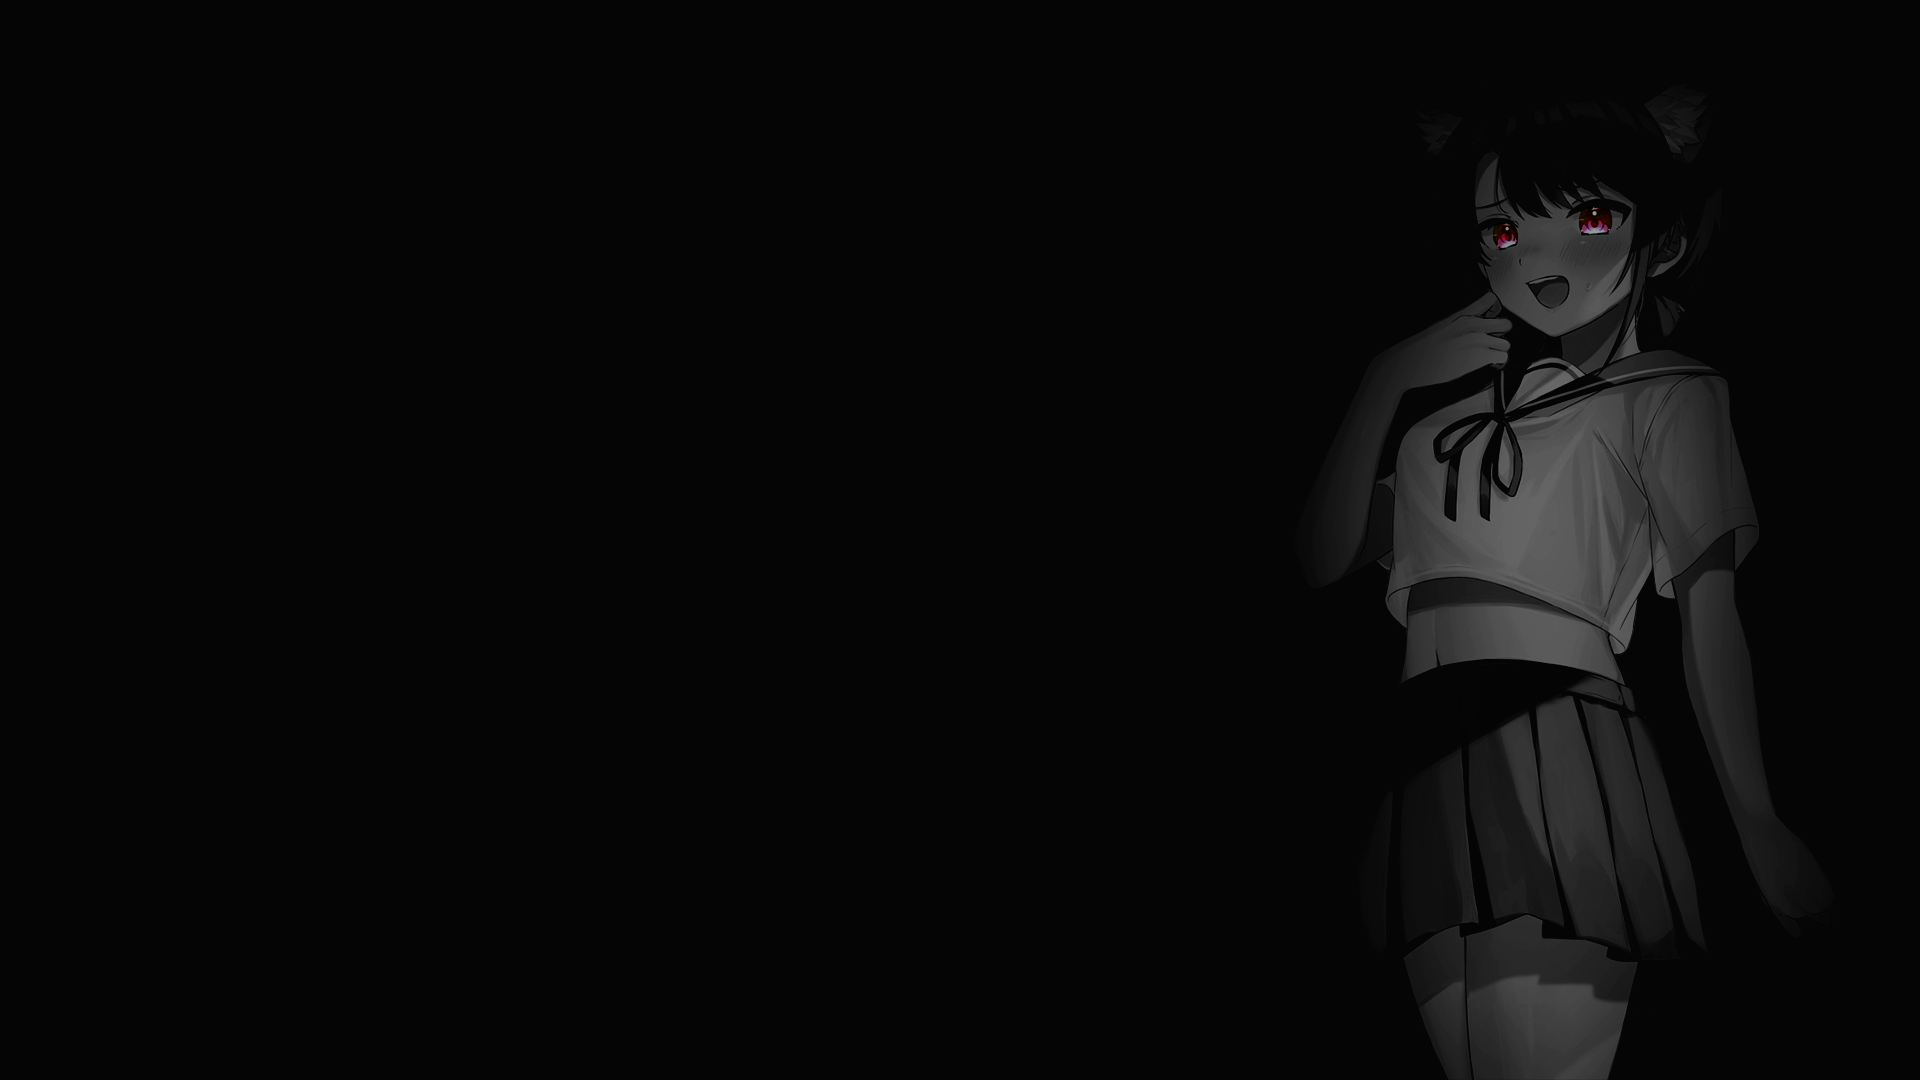 Anime 1920x1080 selective coloring simple background dark background black background anime girls school uniform schoolgirl belly